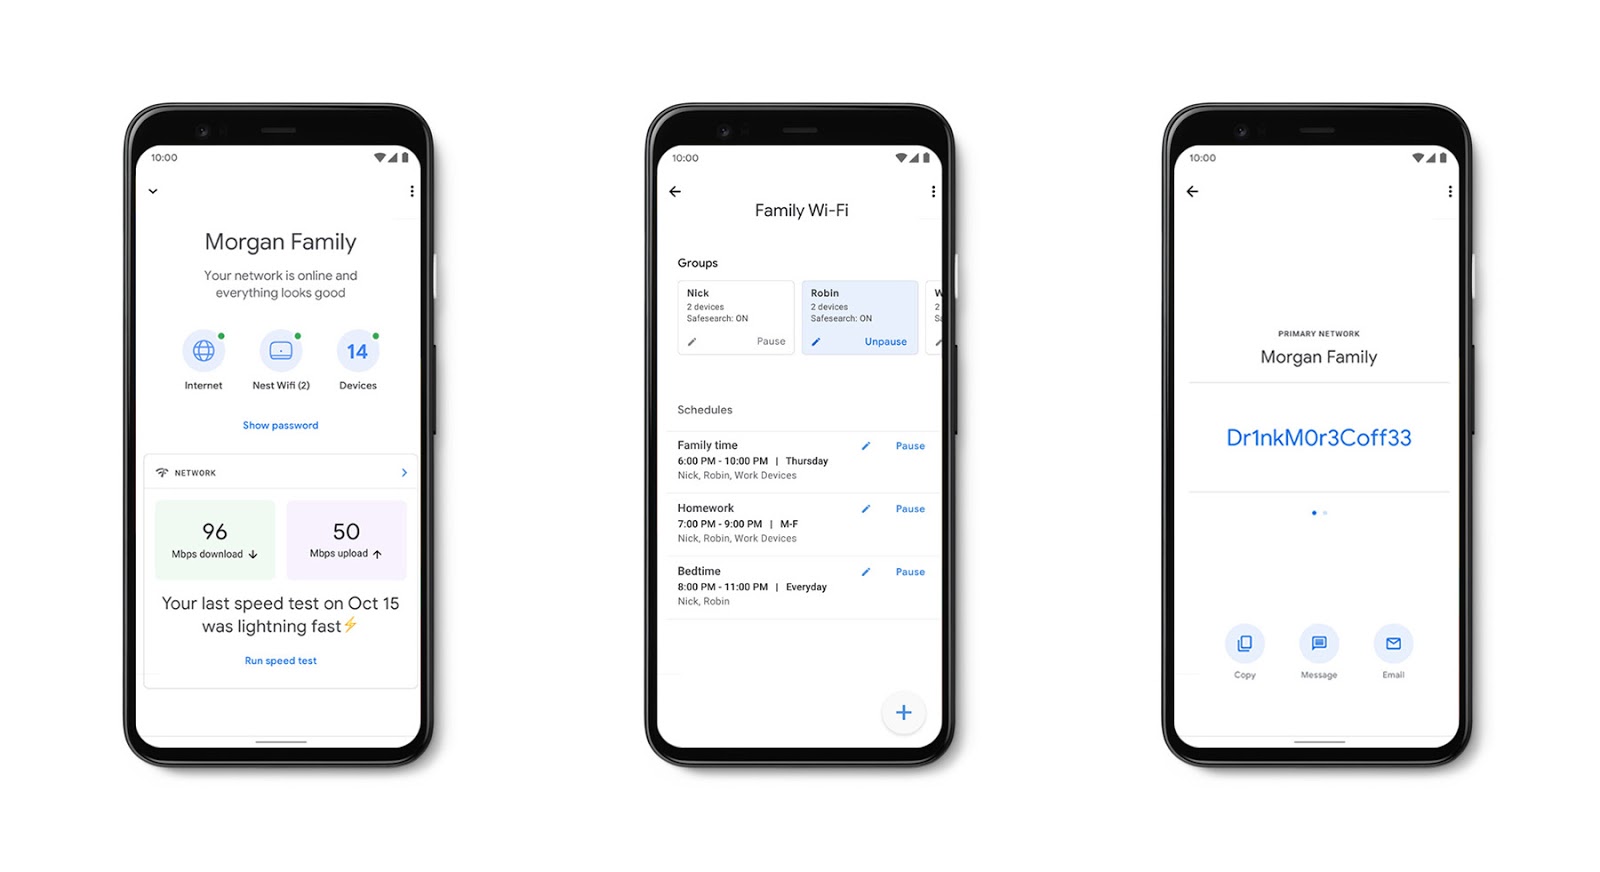 An image showing three phones showing how the Google Home app can help you manage multiple devices and schedules